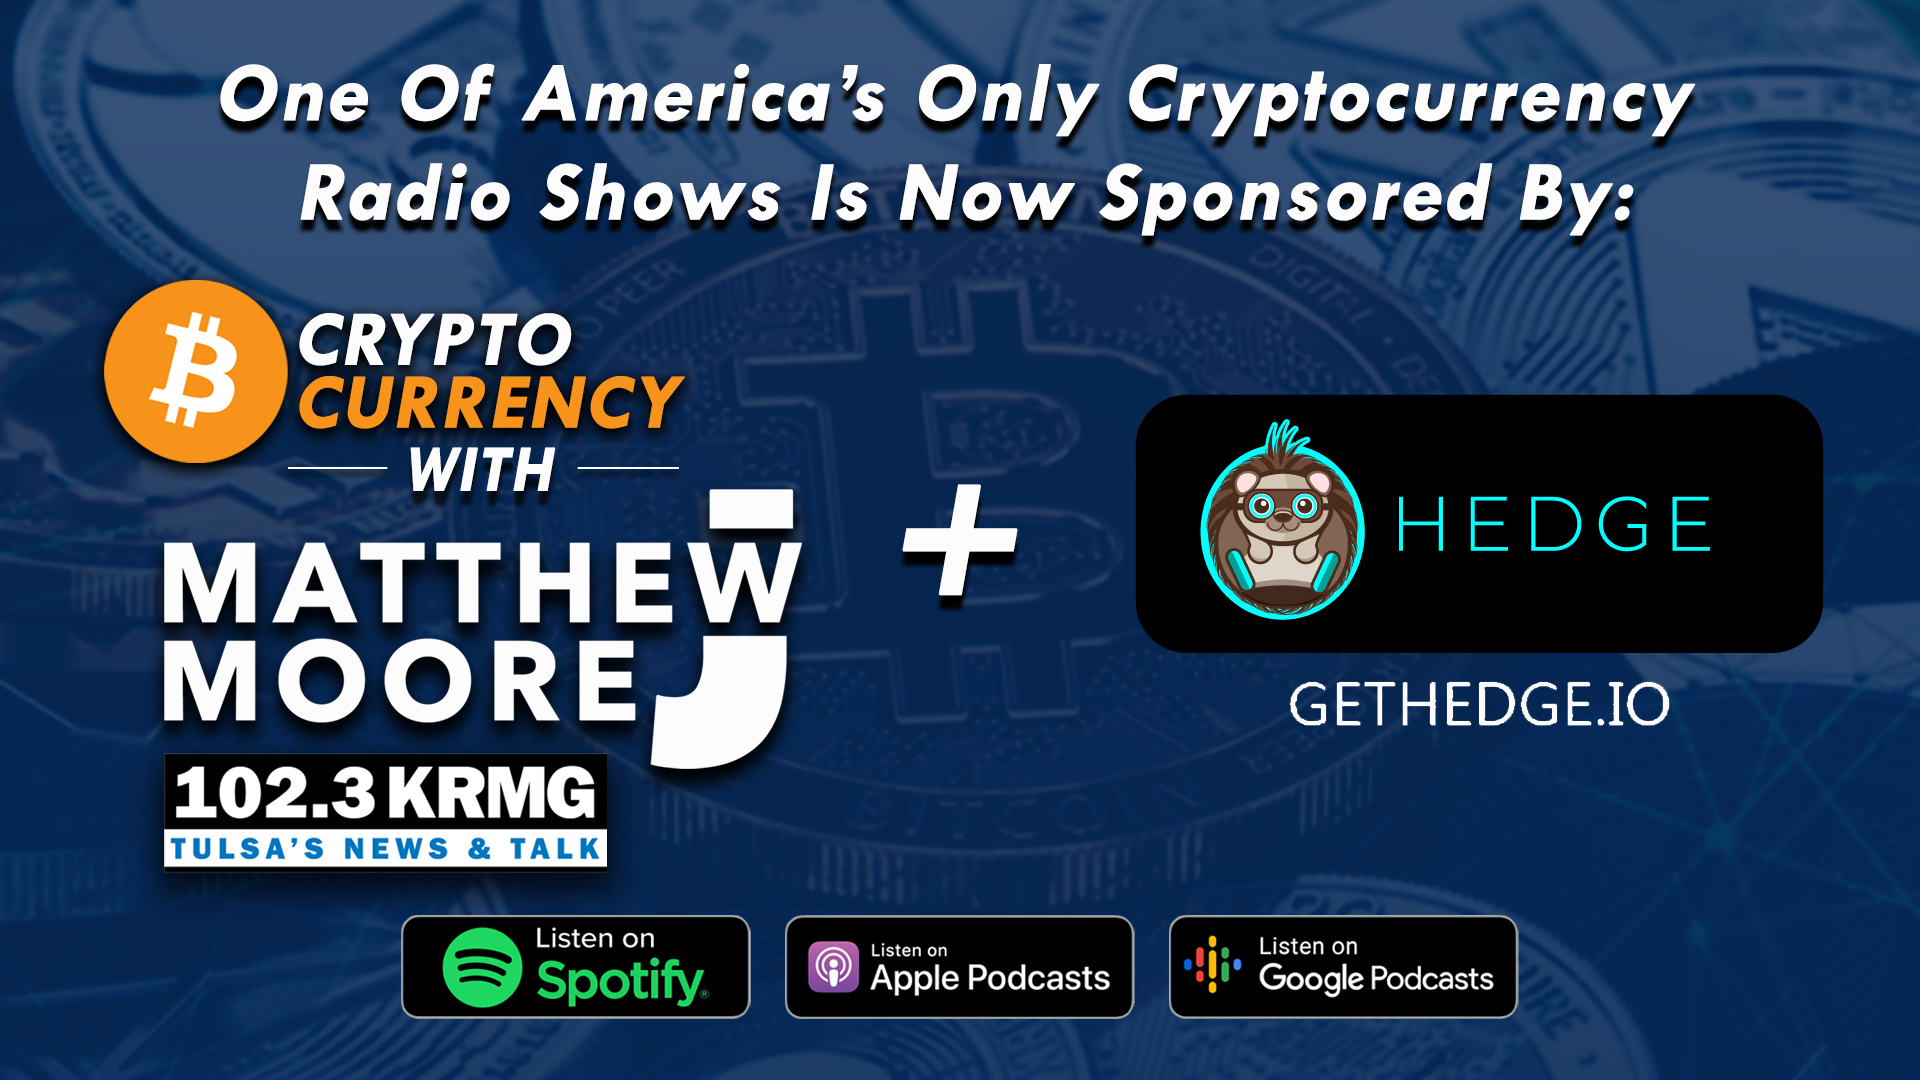 One of America's Only Cryptocurrency Radio Shows is now sponsored by hedge